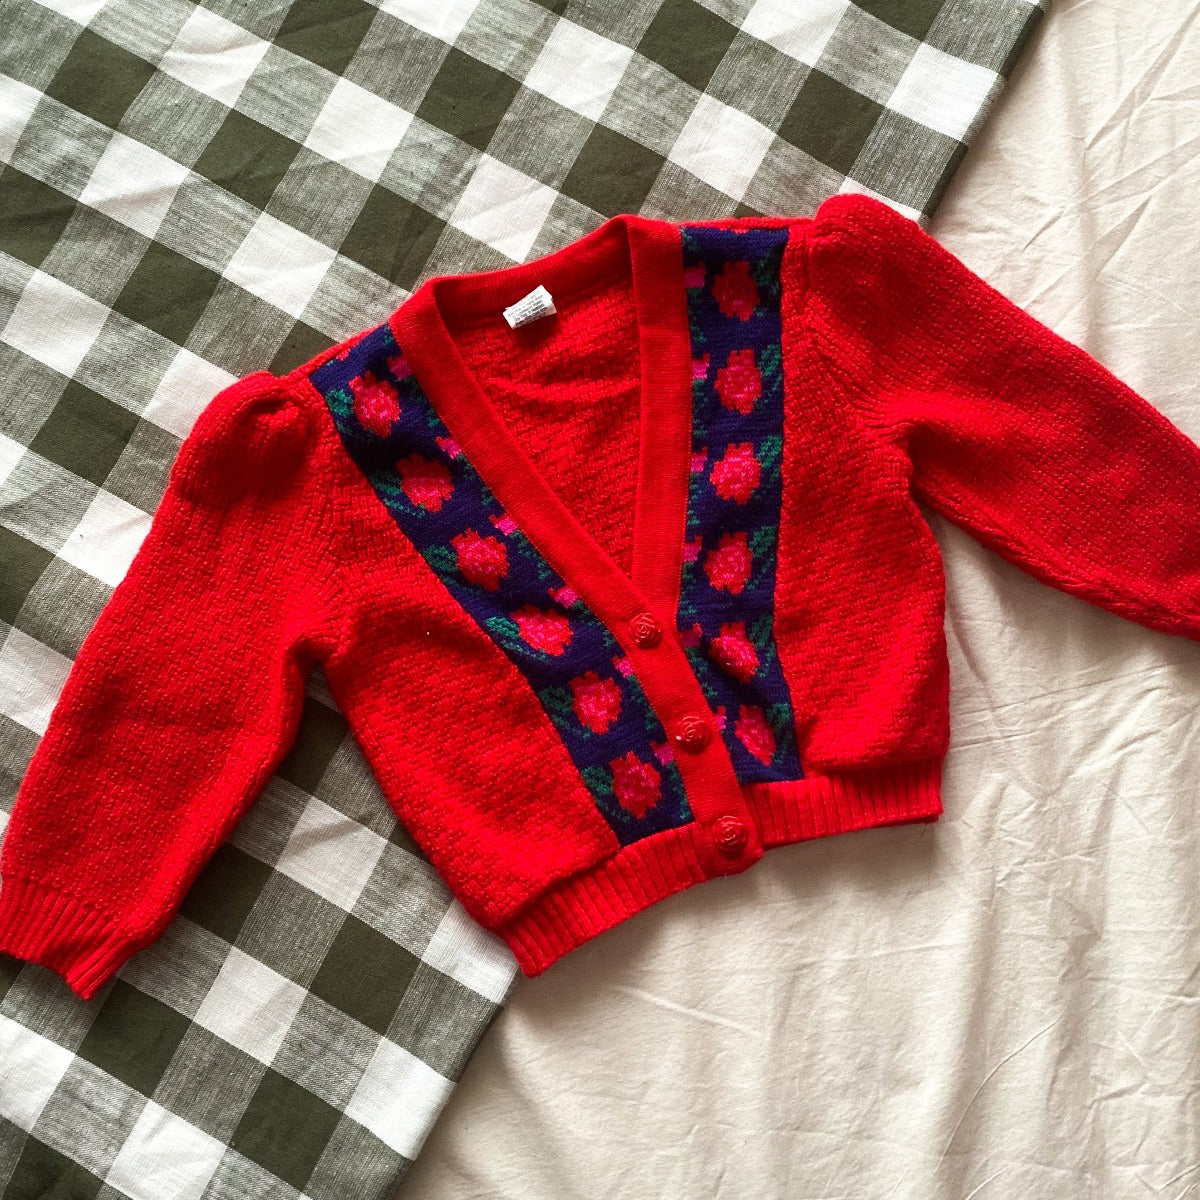 Vintage Rose Knit Cardi, approx 2-4 years